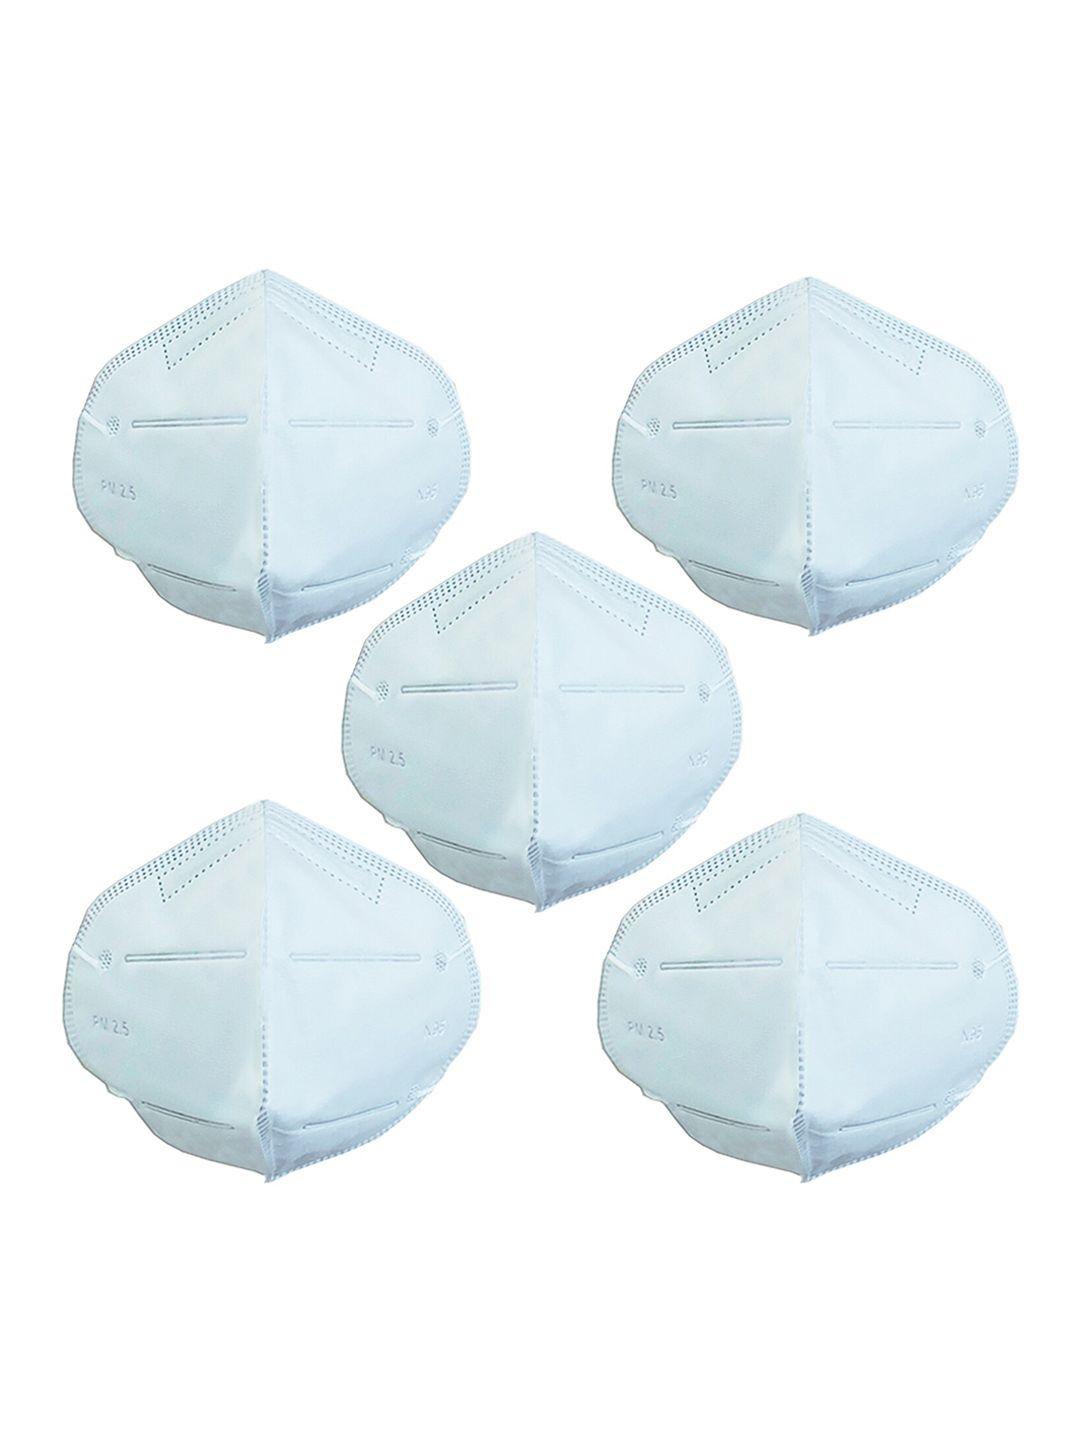 teemoods pack of 5 outdoor reusable & disposable masks